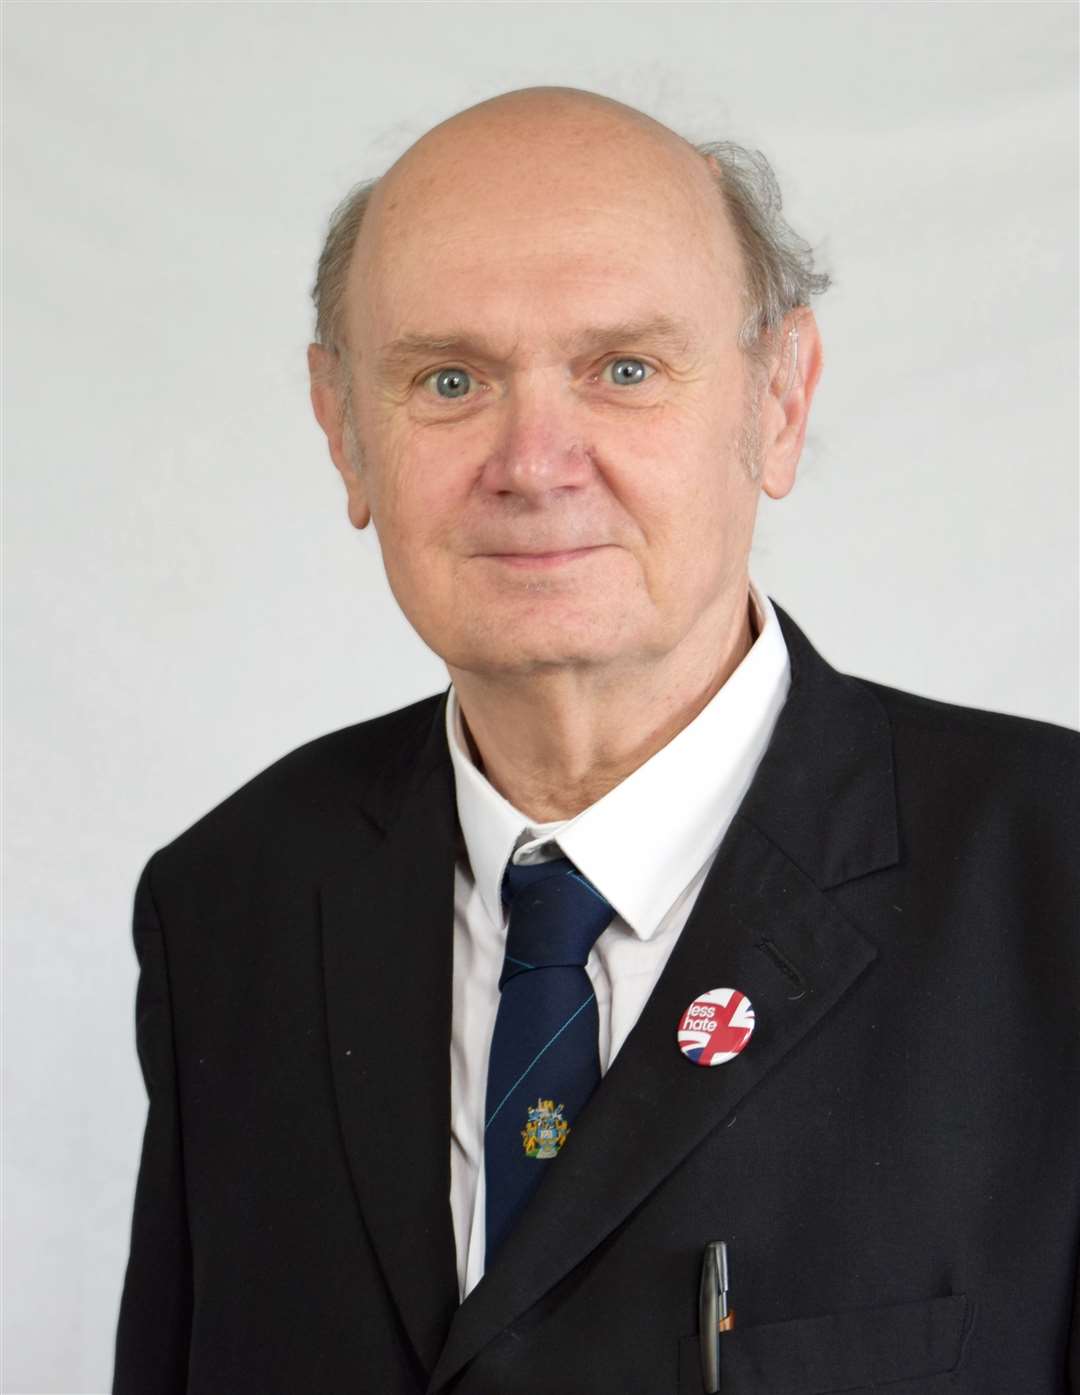 Cllr Charles Joyce, leader of the Labour Group at West Norfolk Council. Picture: West Norfolk Council